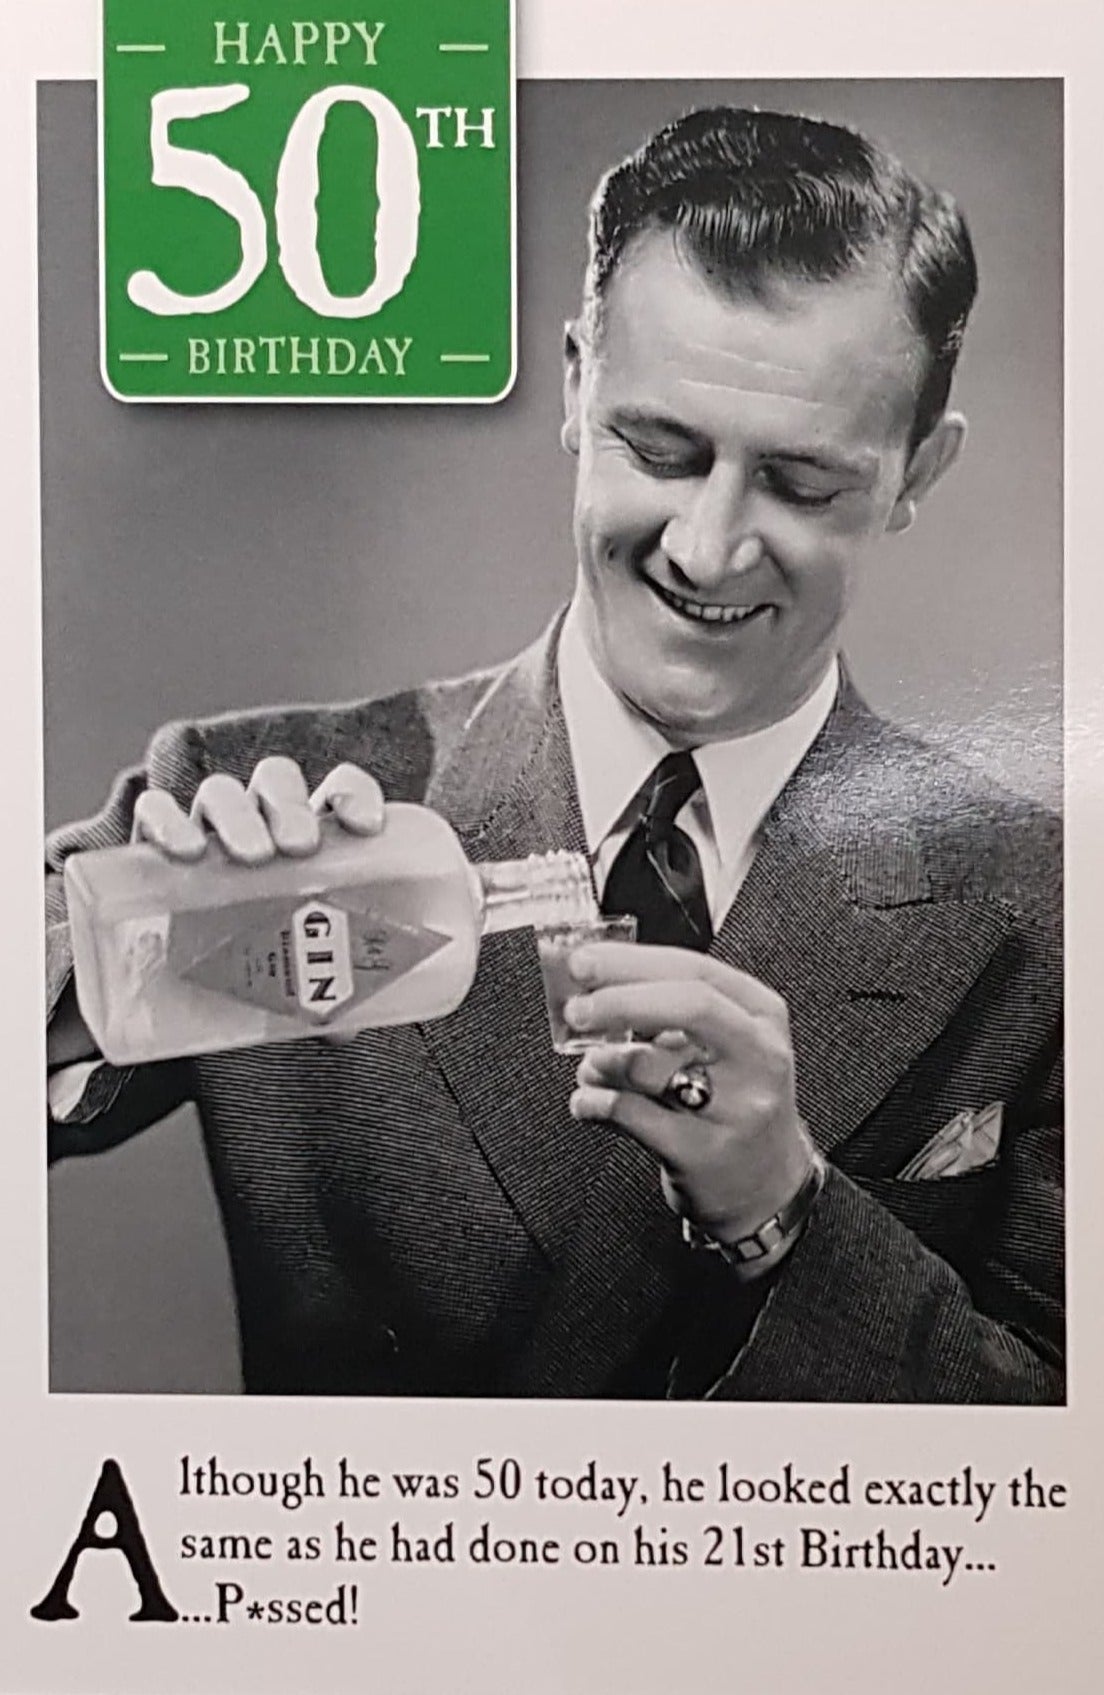 Age 50 Birthday Card - A Man Pouring A Shot Of Gin (Humour)